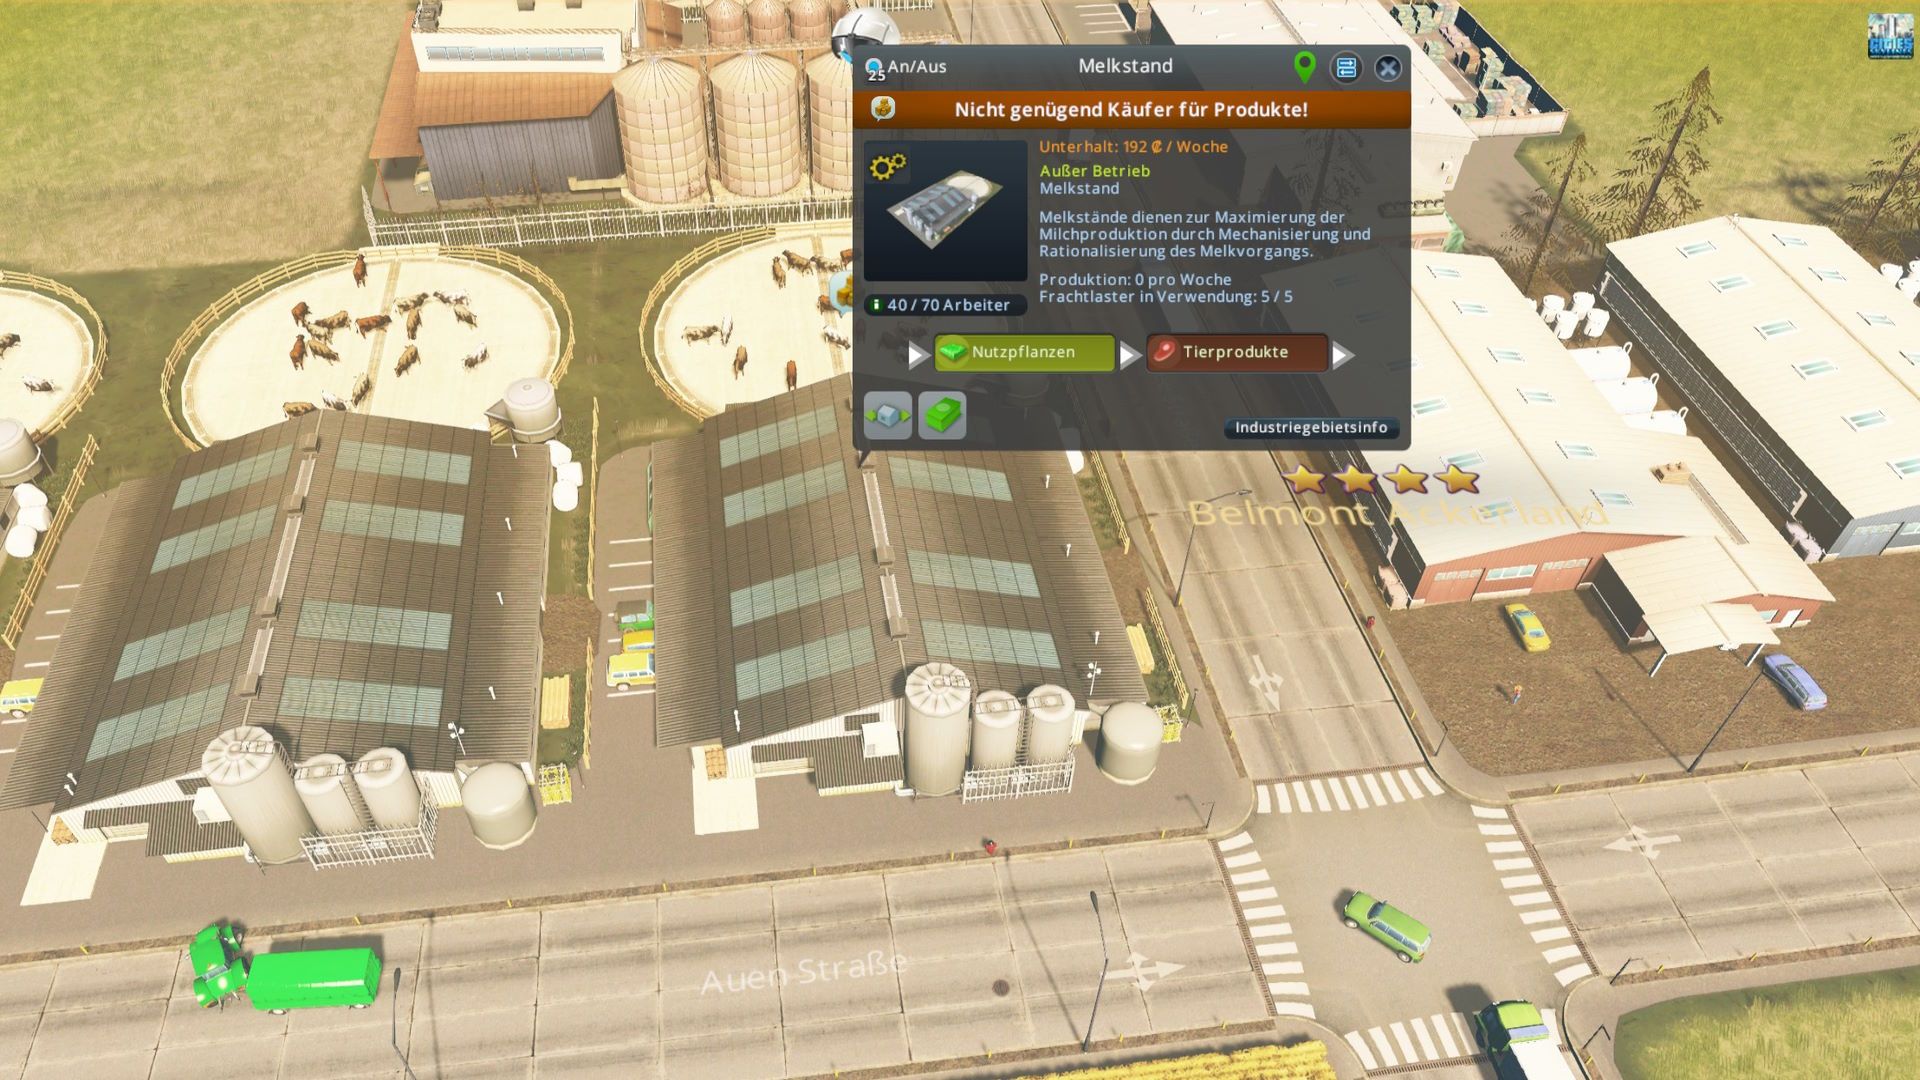 Milking parlor in a farming industry in Cities: Skylines has a full storage.